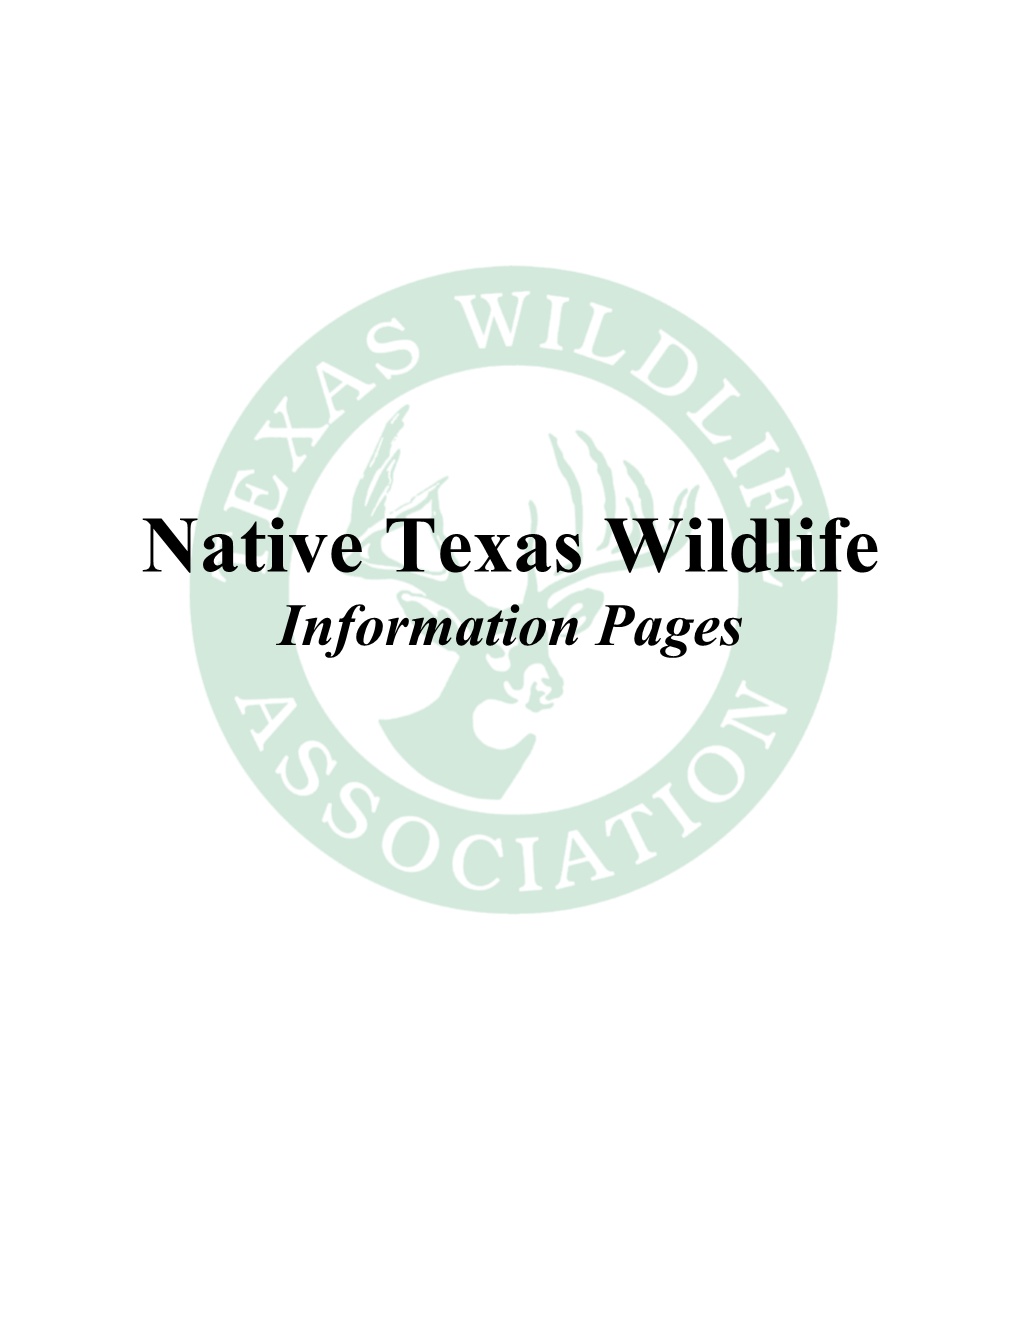 Native Texas Wildlife Information Pages